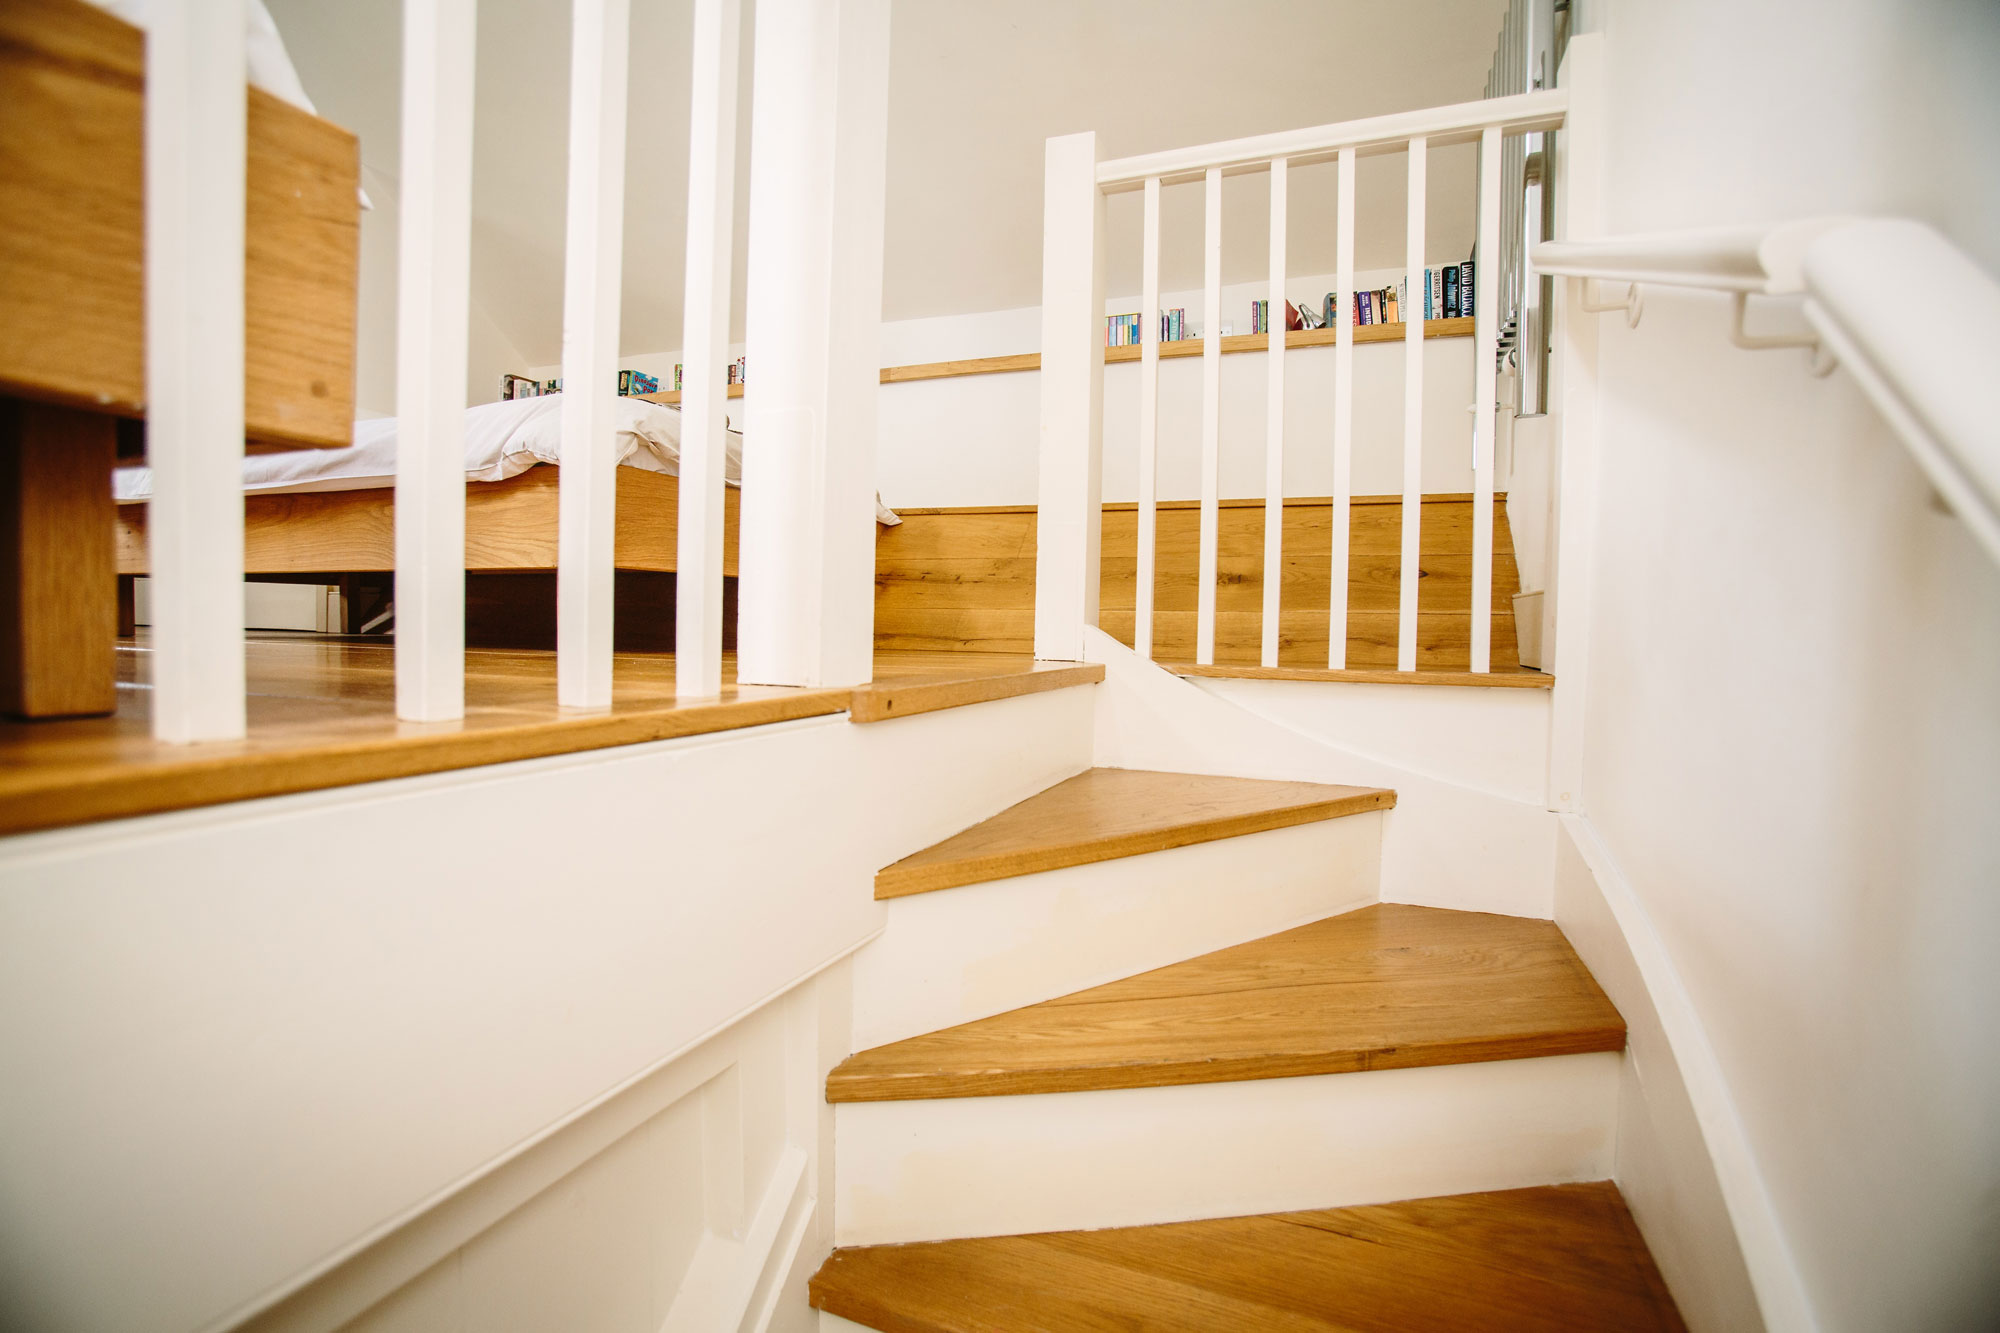 Our staircases are handcrafted from oak (this is bedroom 3)